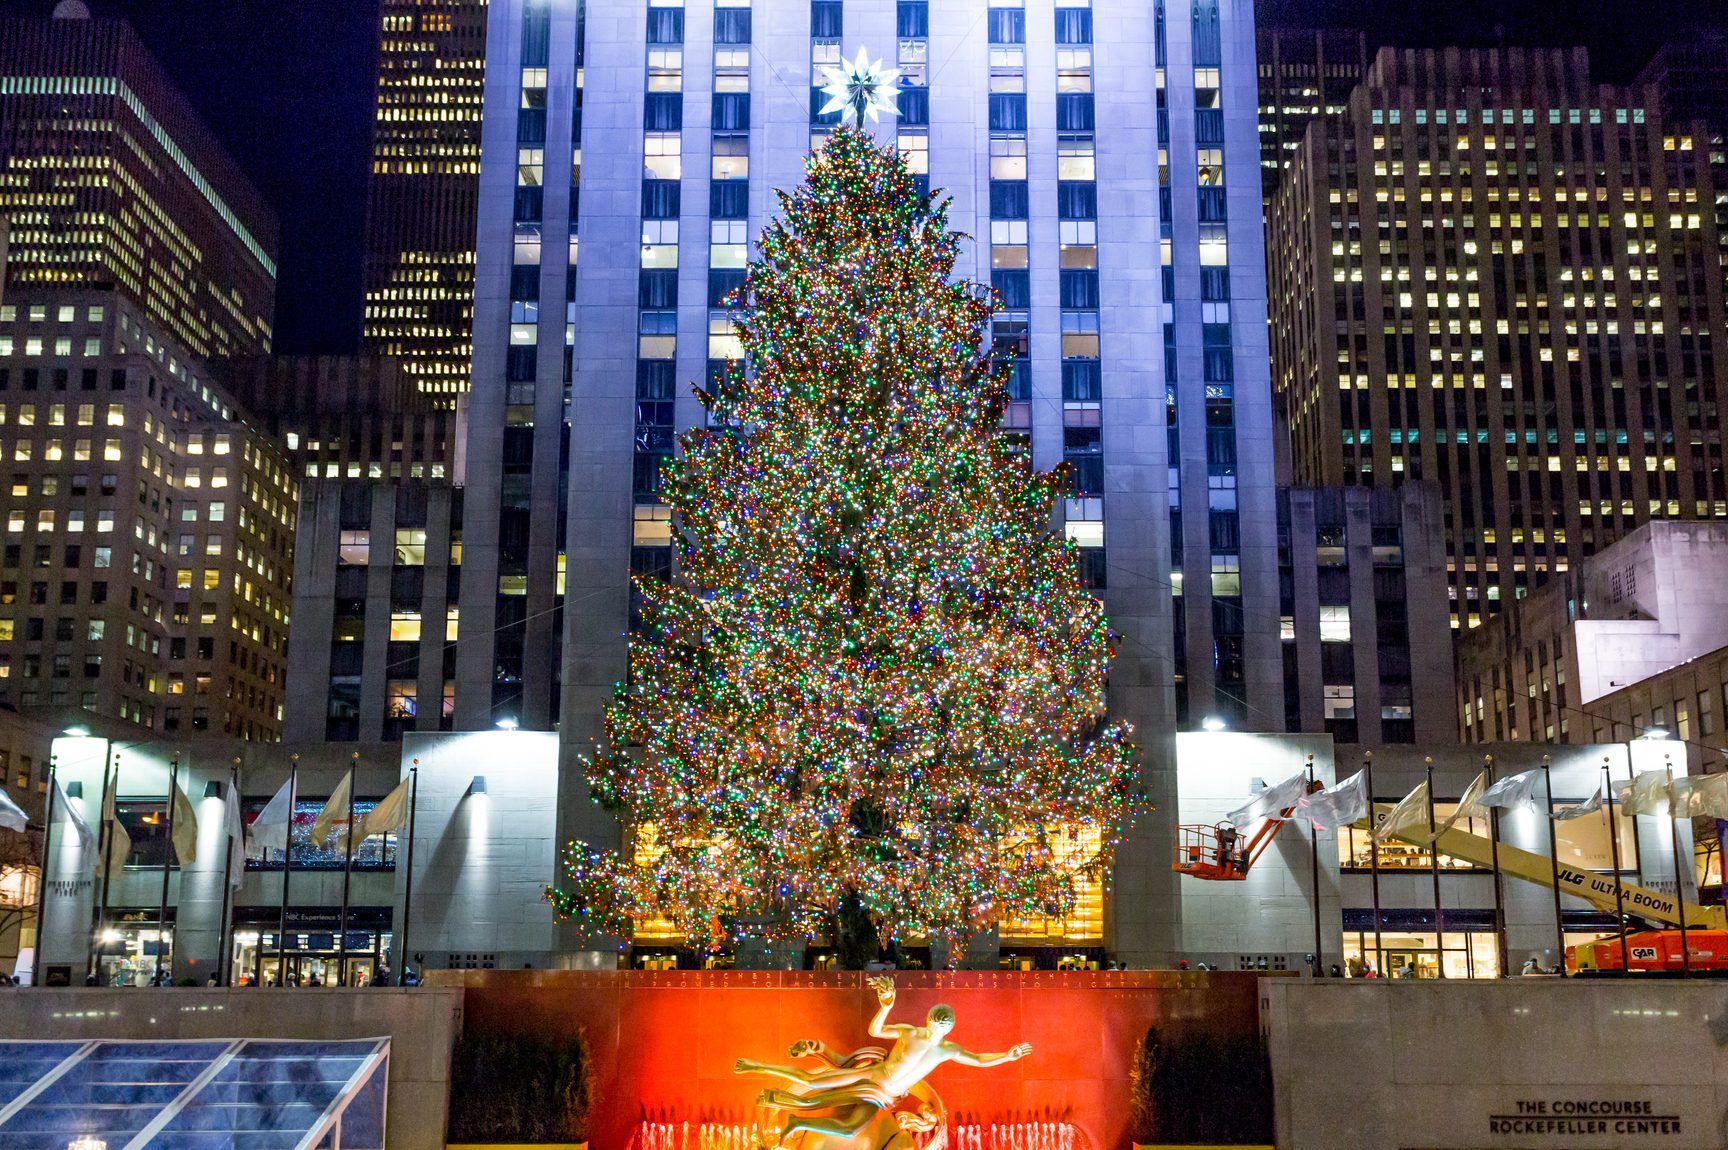 Rockefeller Center Tree Details About NYC's Iconic Christmas Decoration